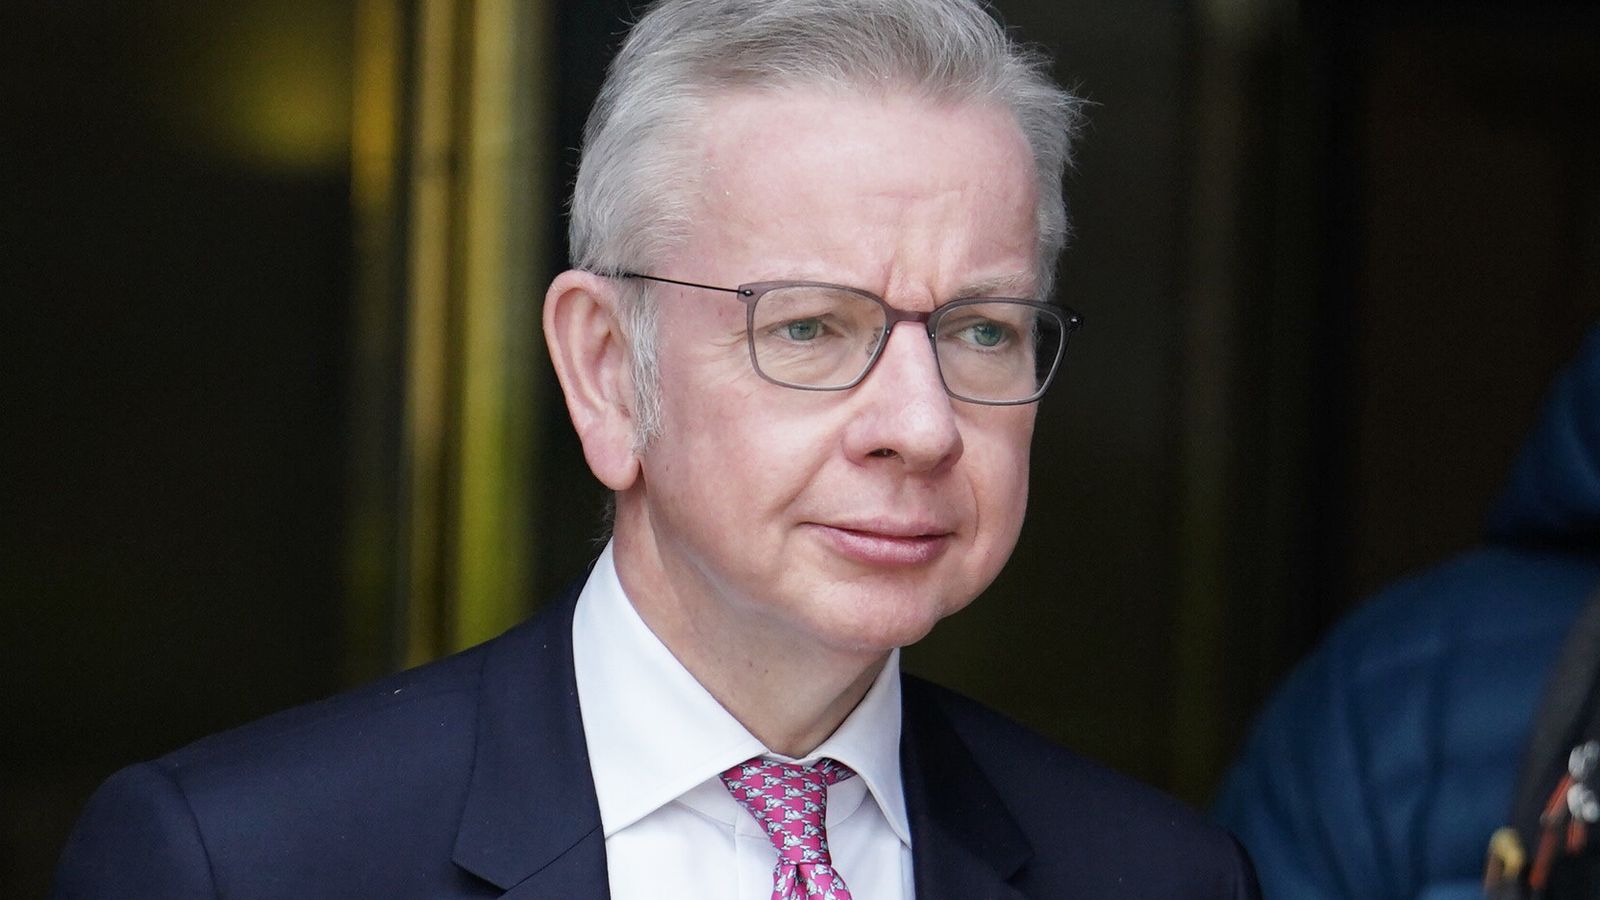 Groups accused of 'extremism' hit back at Michael Gove and say re-assessment 'will motivate us'